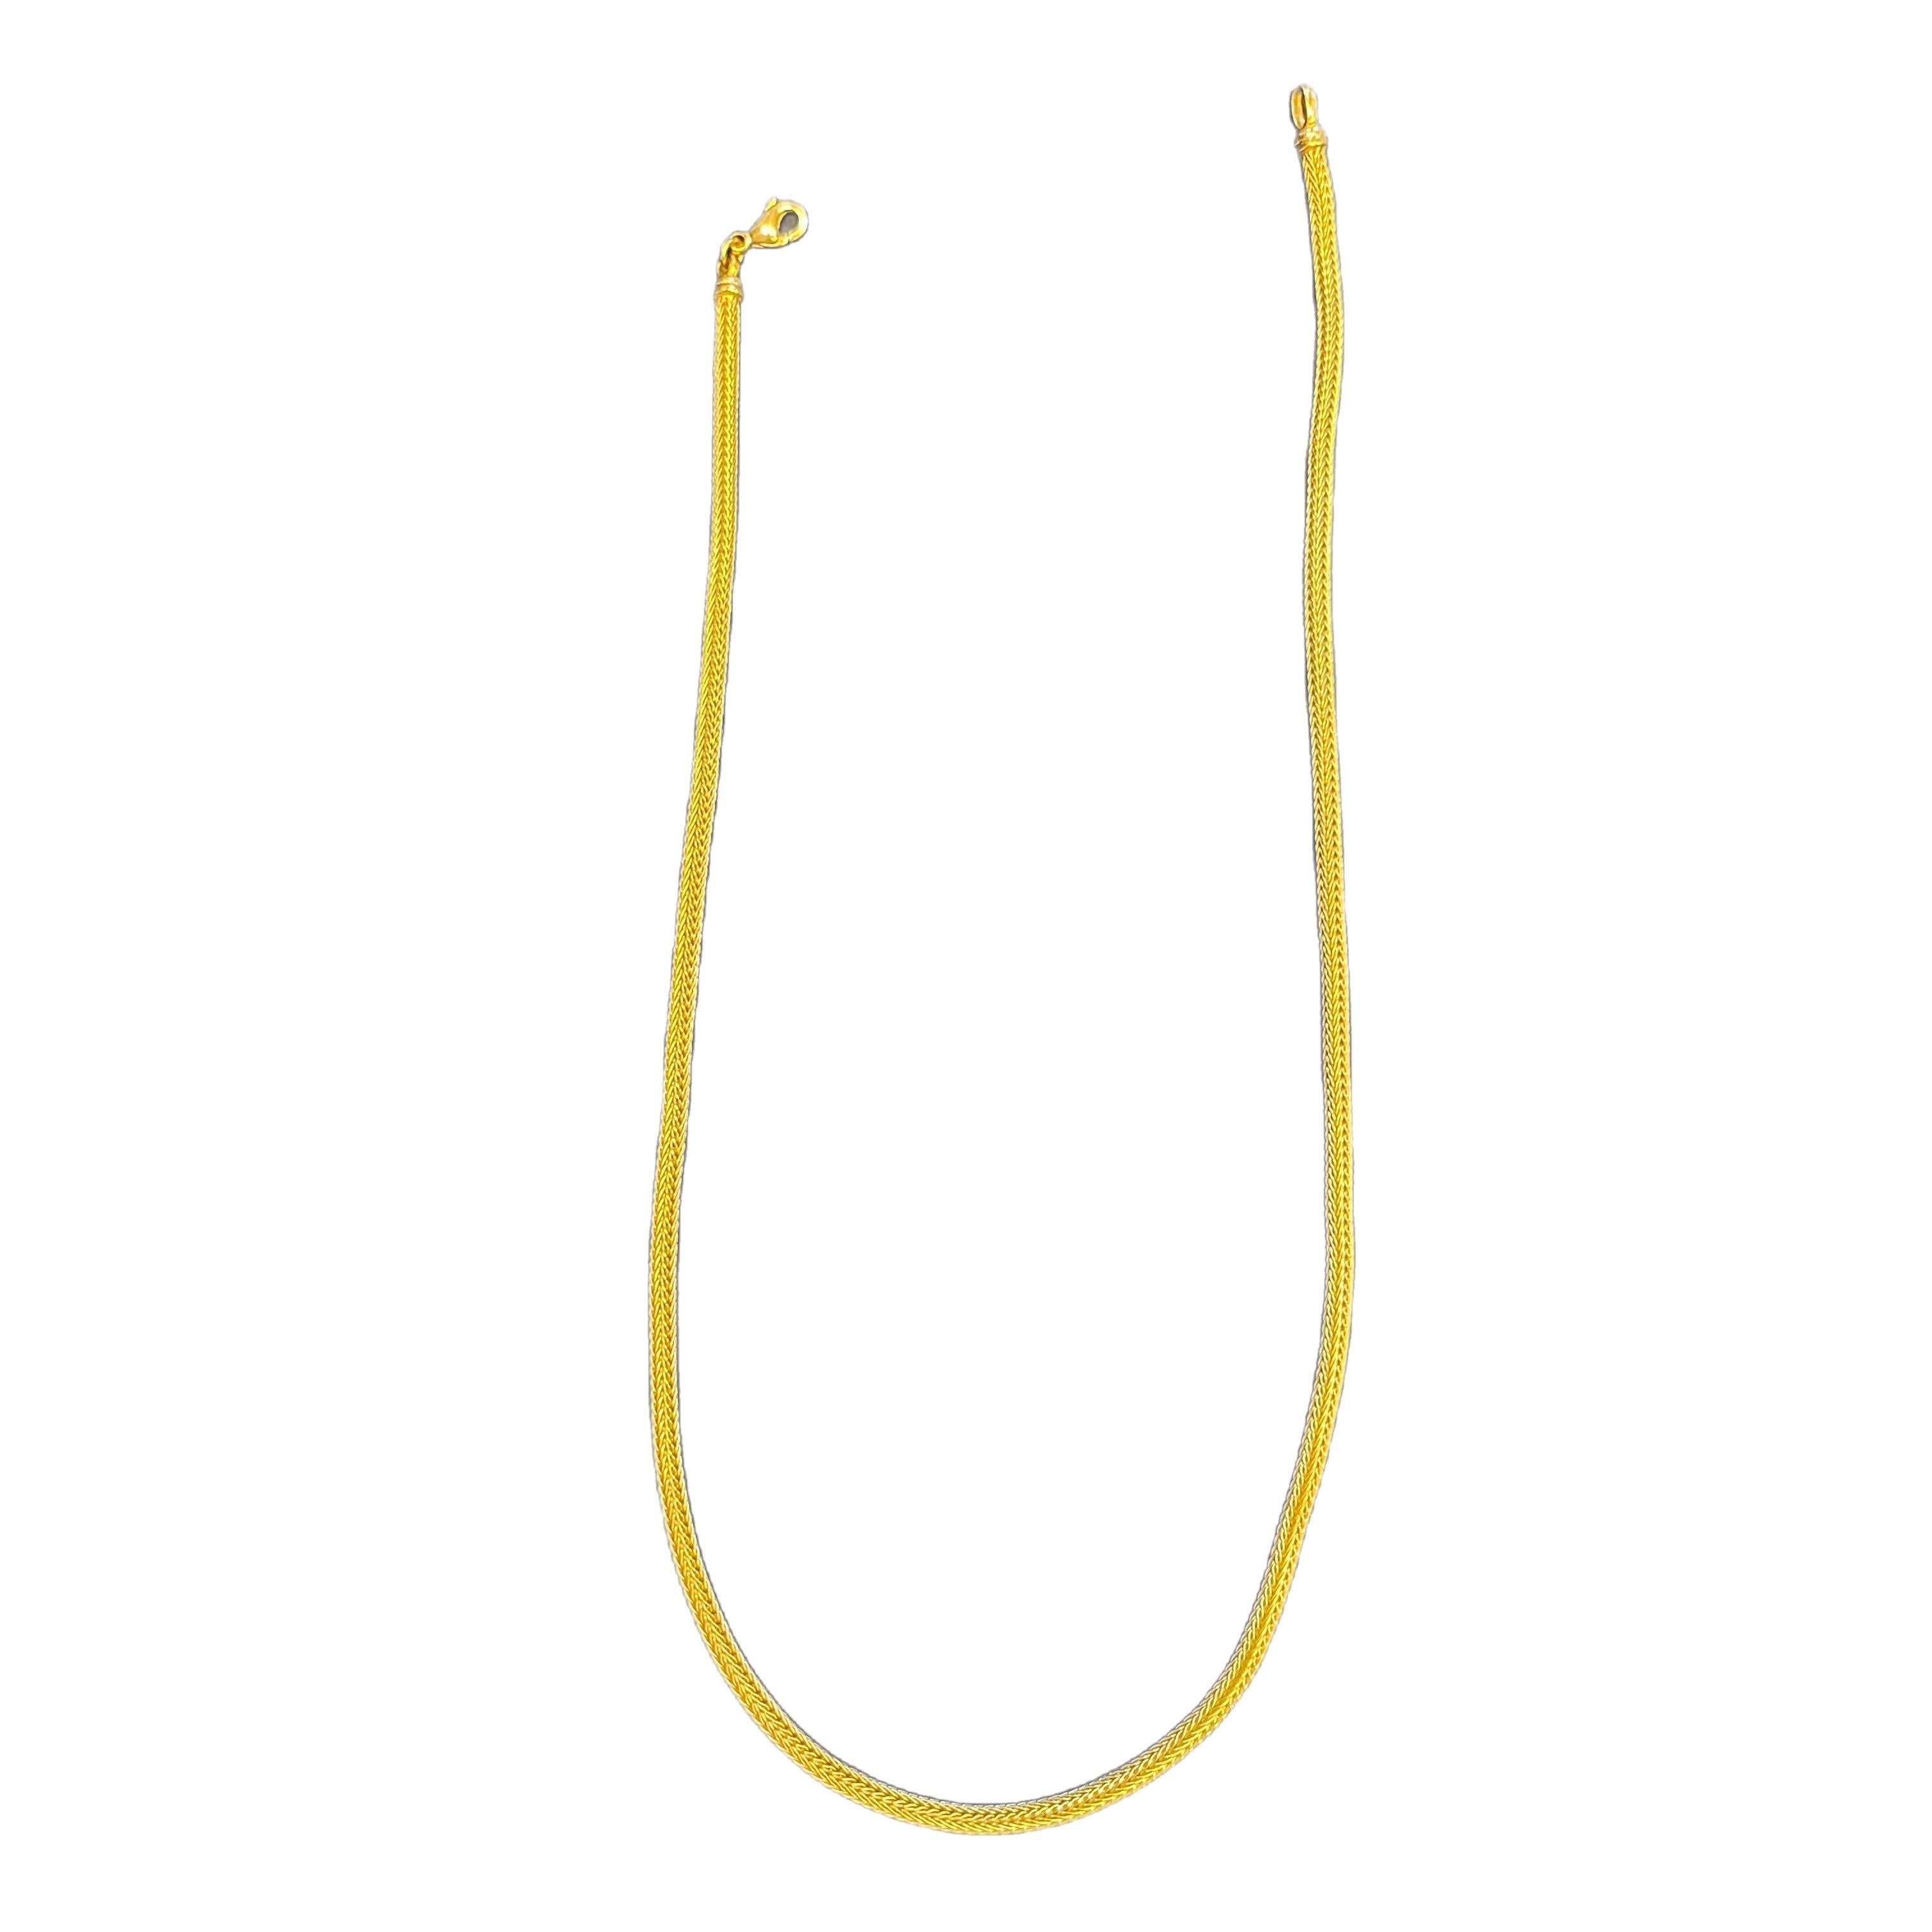 Yellow gold necklace made in Germany. 
This light and easy to wear necklace is a great casual piece with elegant flair. 
Crafted in Finley woven 18 Karat gold. Wear it plain or as a base for your layered looks.
Approximately 21 grams. 


  All items